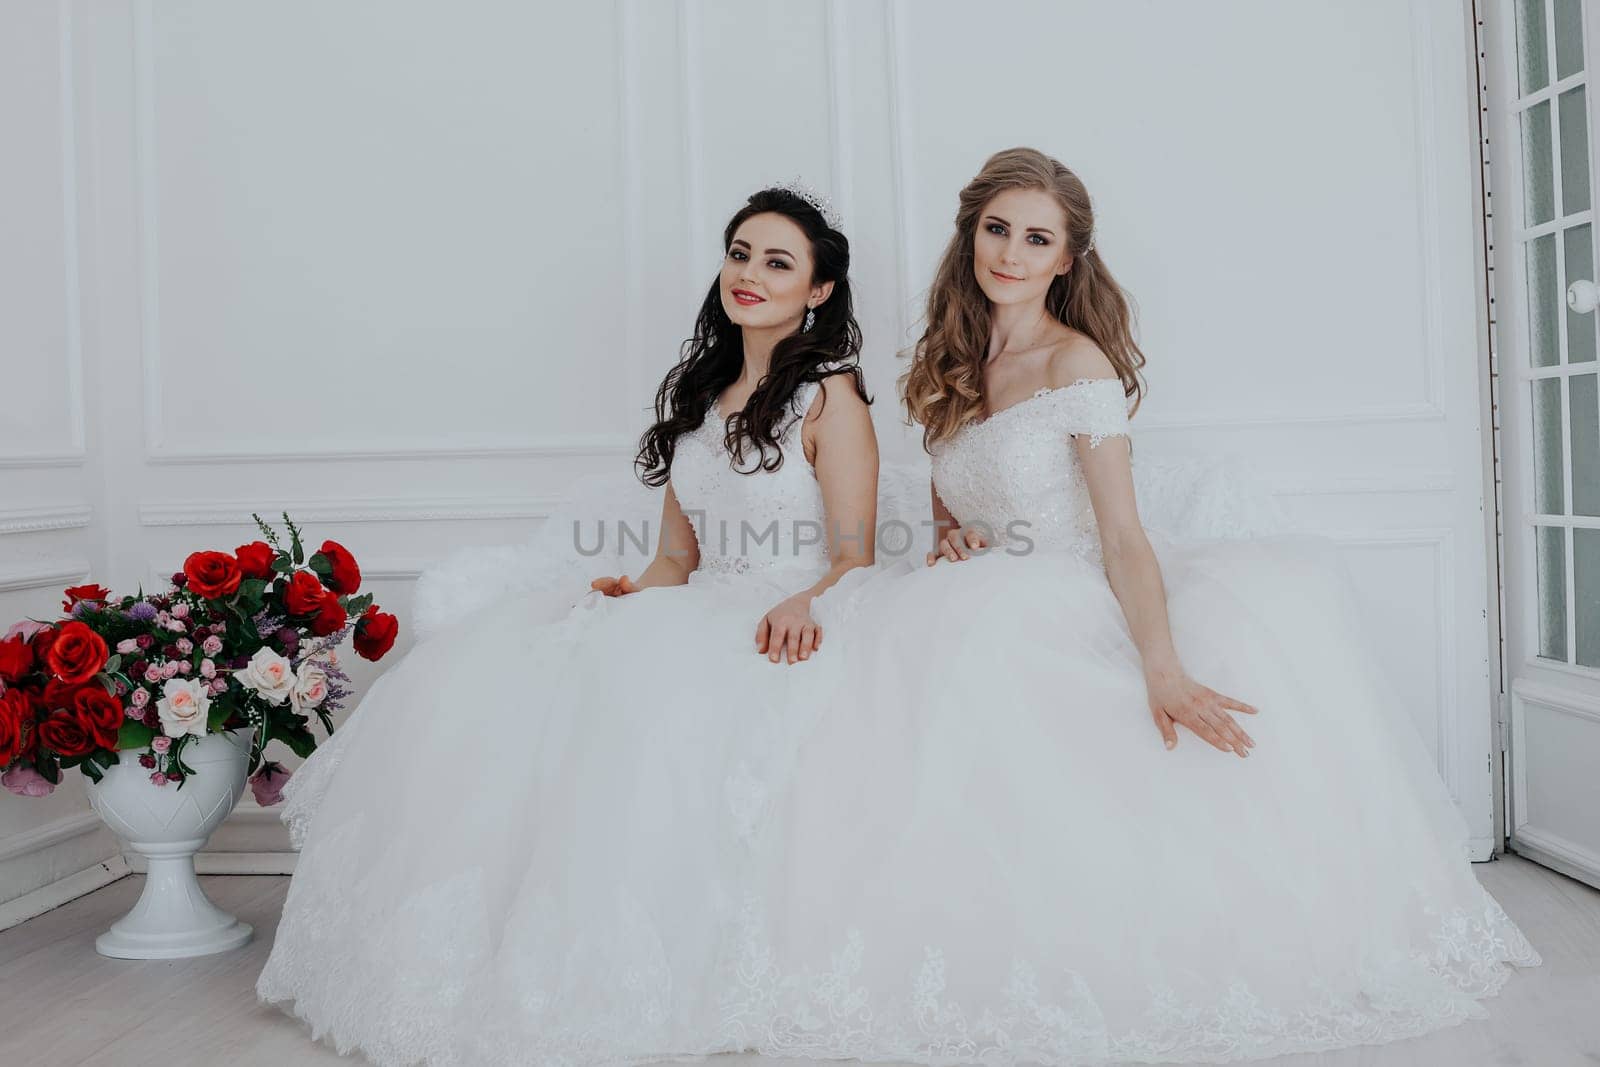 two brides in wedding dresses sit on a white couch in the room